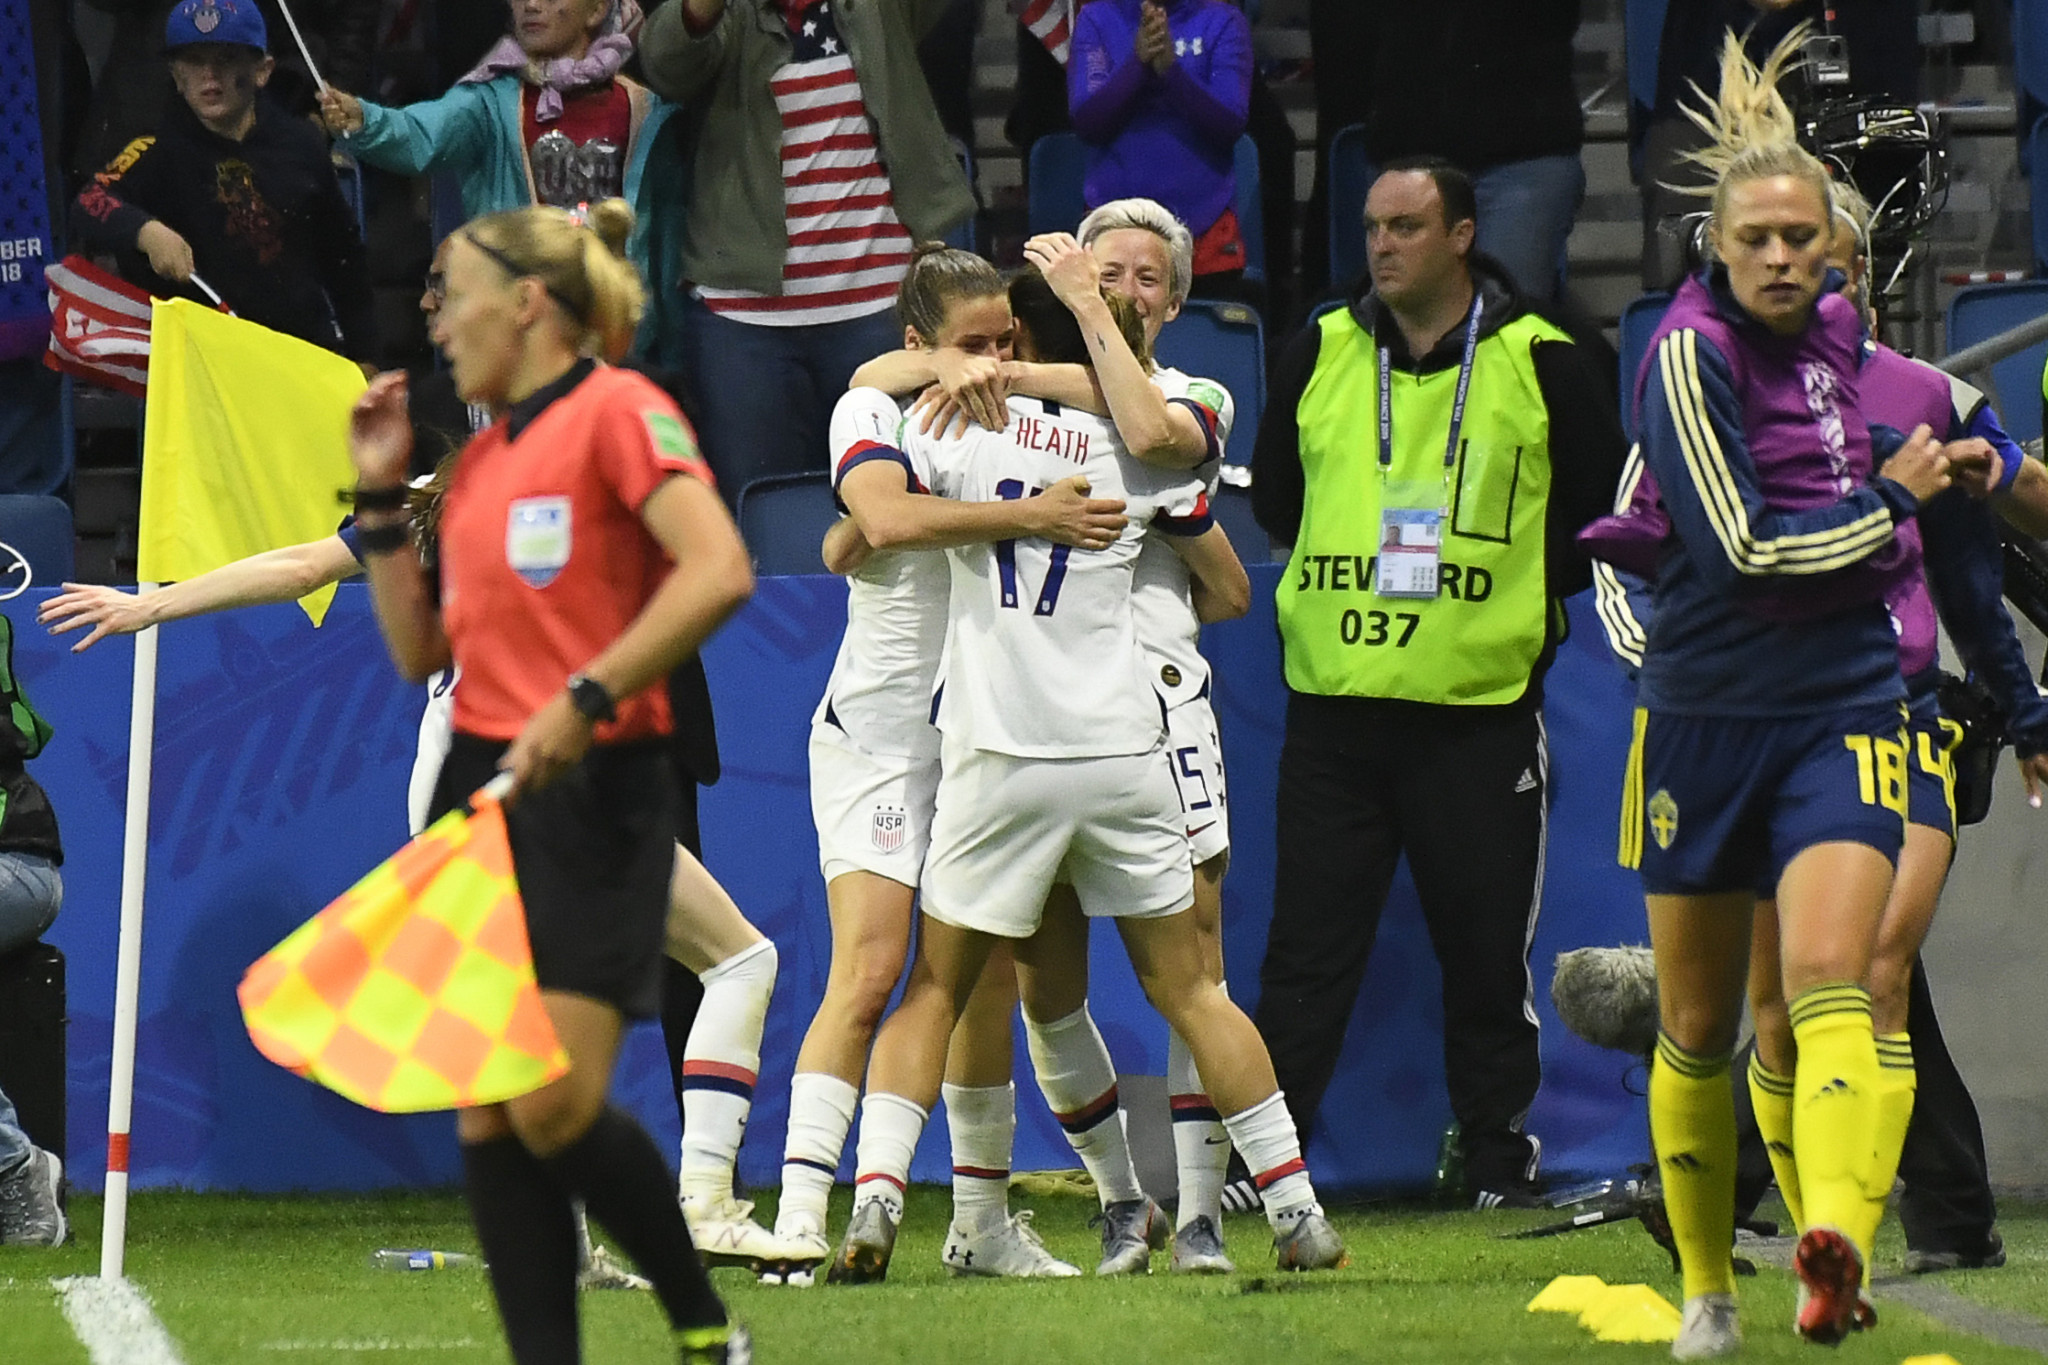 FIFA Women's World Cup group stage ends as United States rack up